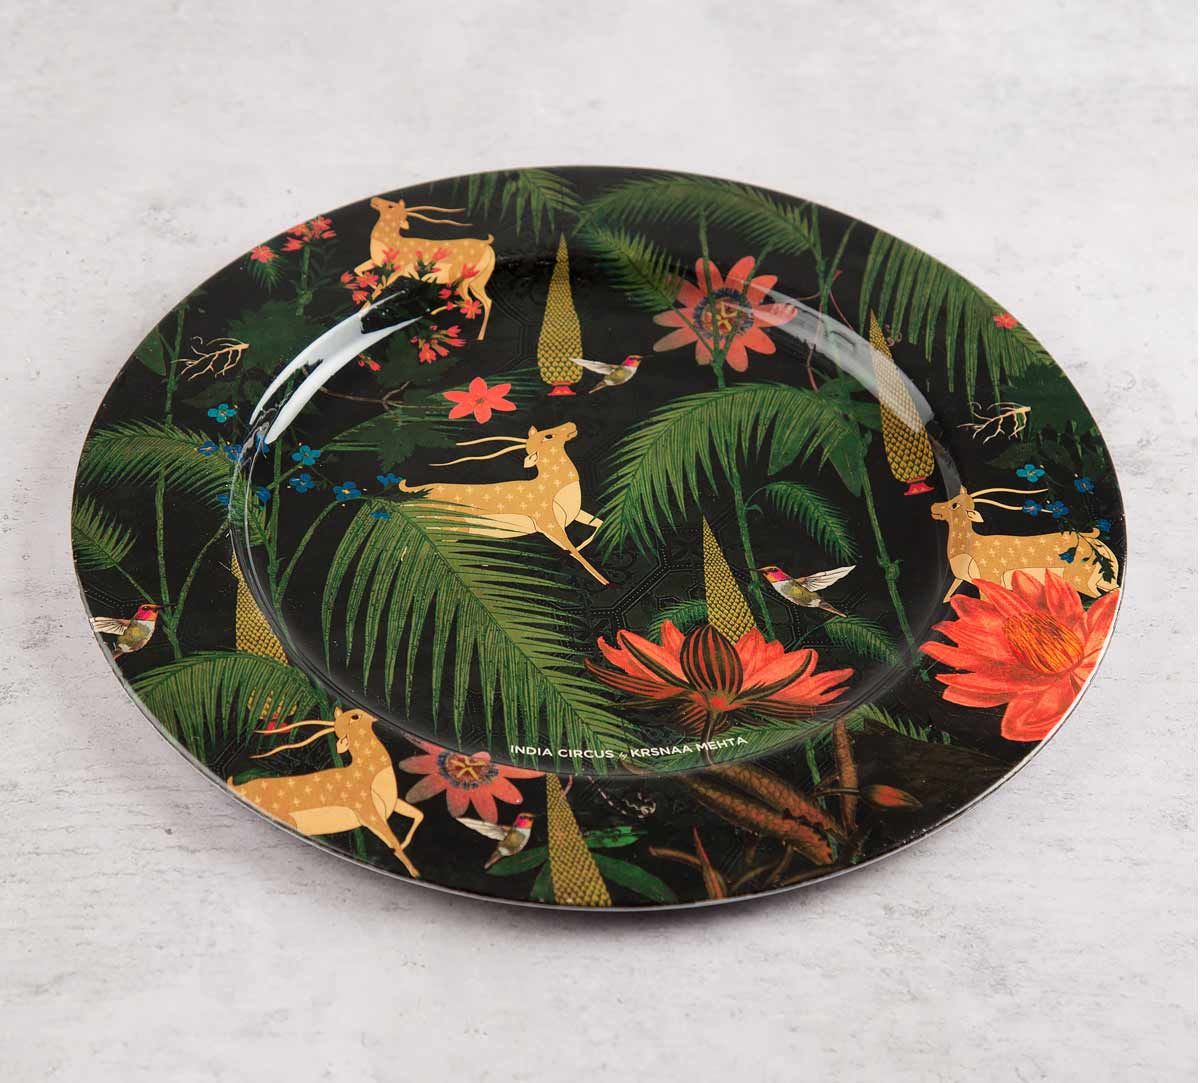 India Circus Forest Fetish Decor Plate